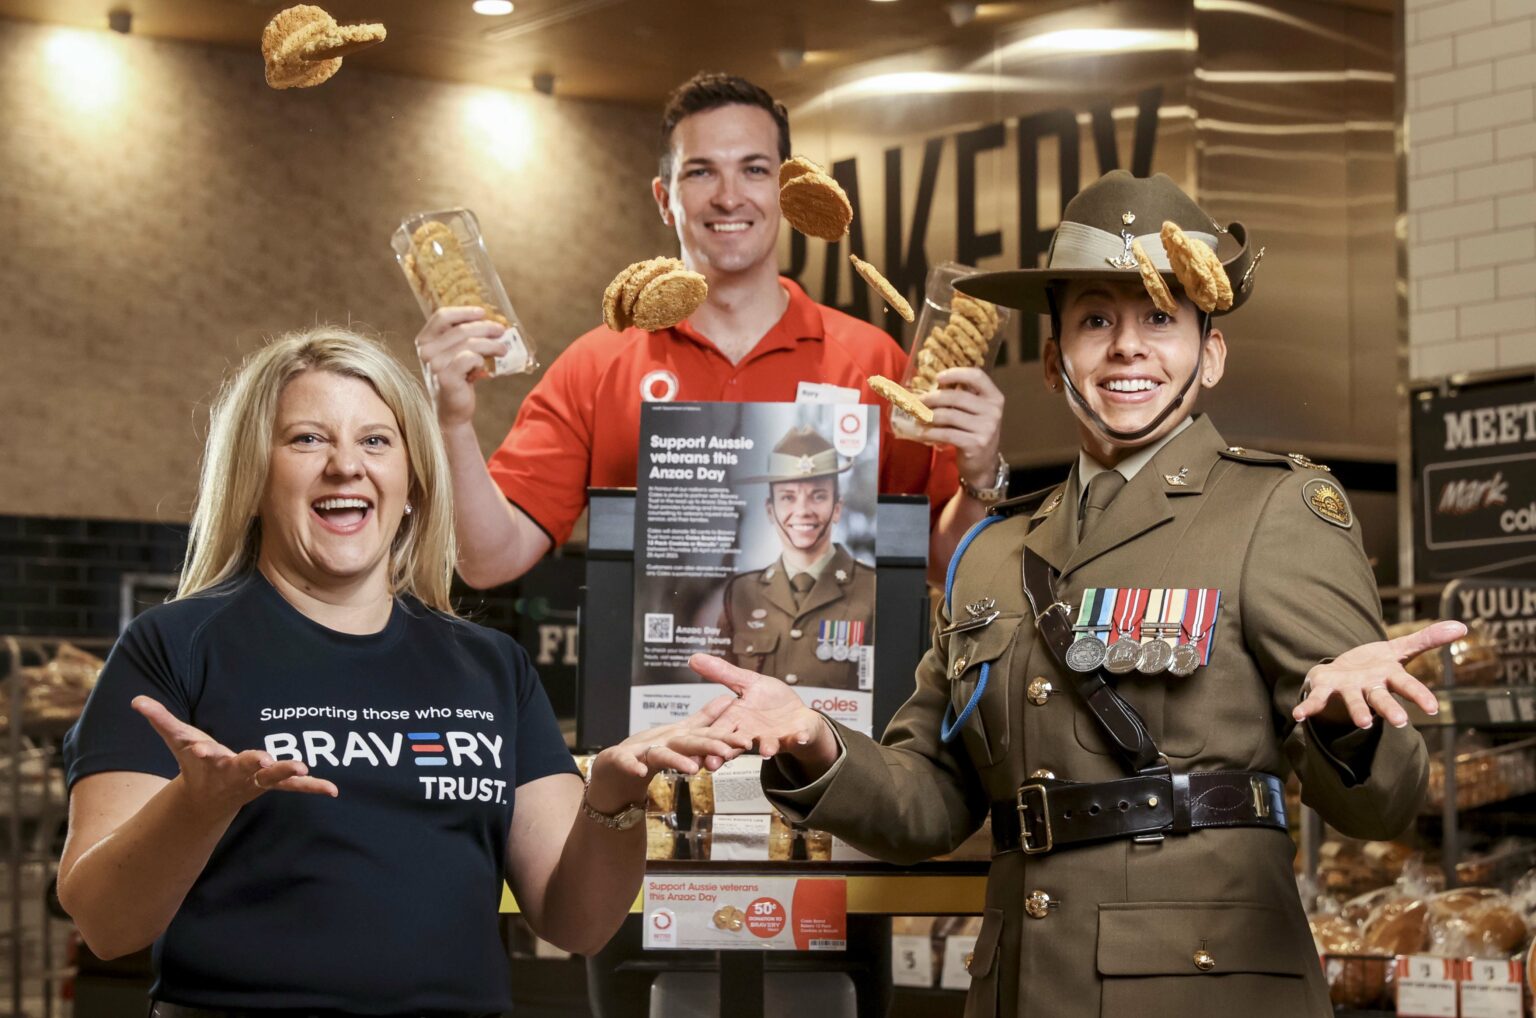 Coles' Annual Bravery Trust Appeal Kicks Off With The Support Of Aussie Sporting Heroes & Veterans